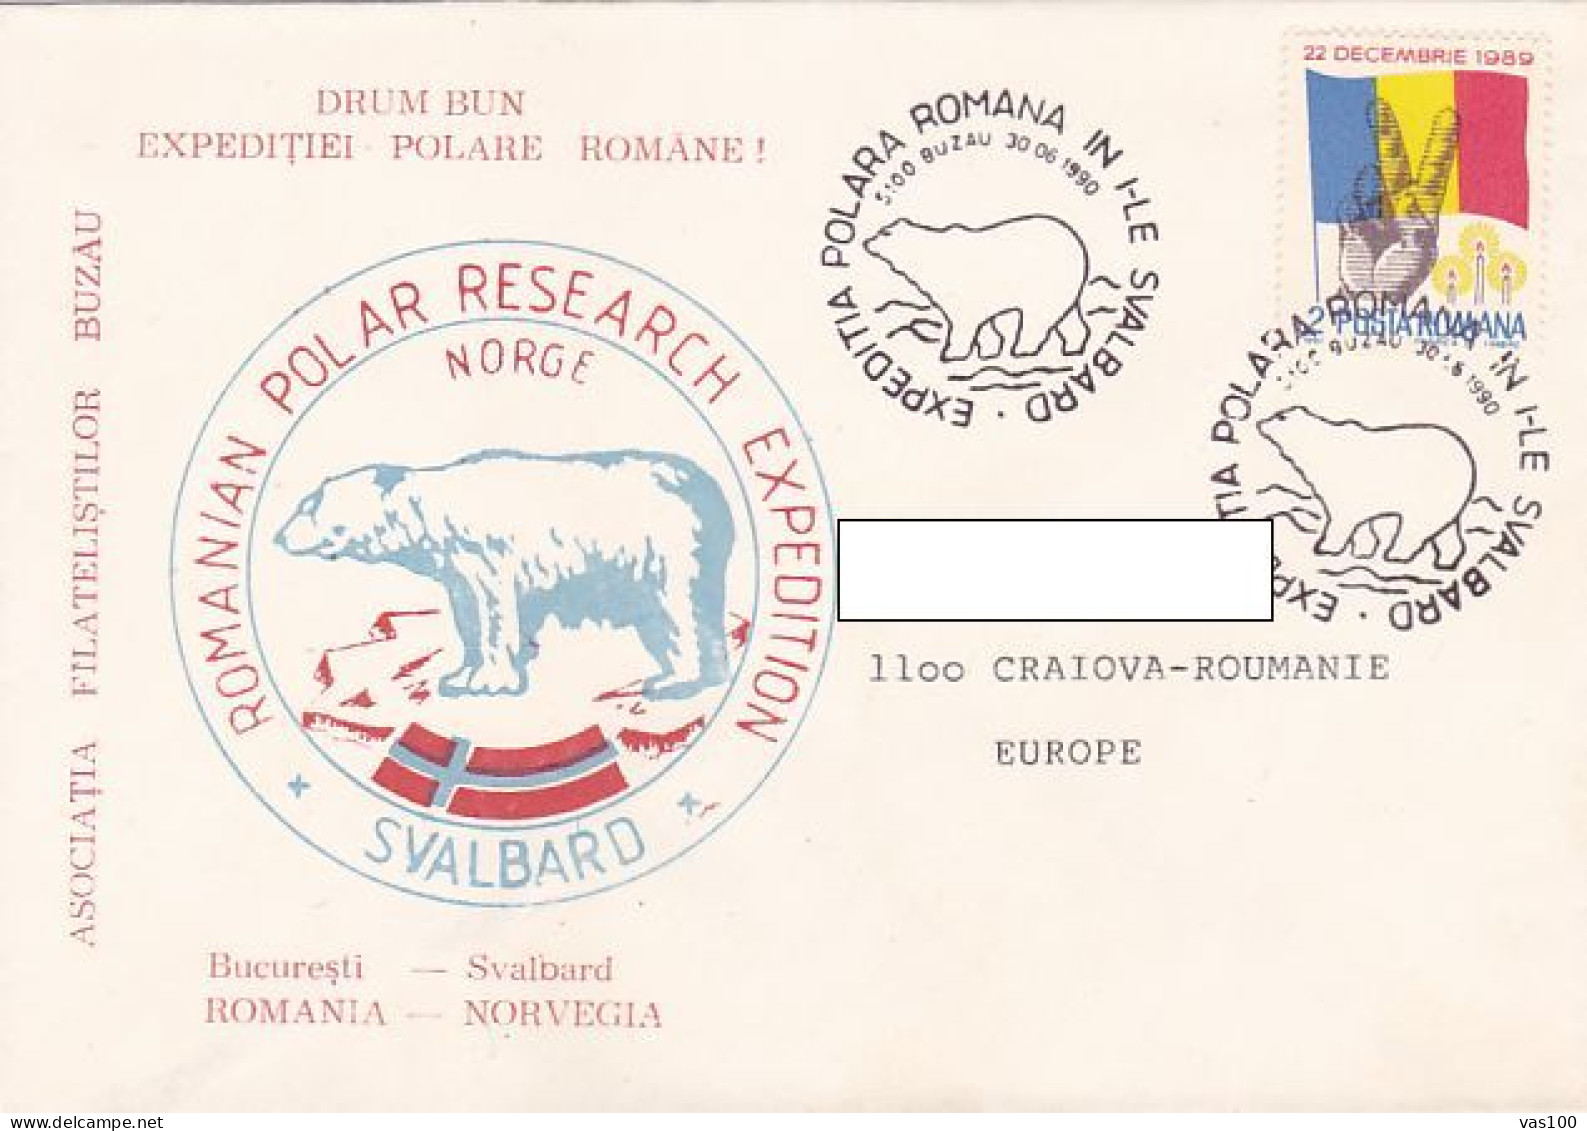 NORTH POLE, ARCTIC EXPEDITION, ROMANIAN EXPEDITION IN SVALBARD, POLAR BEAR, SPECIAL COVER, 1990, ROMANIA - Arctic Expeditions